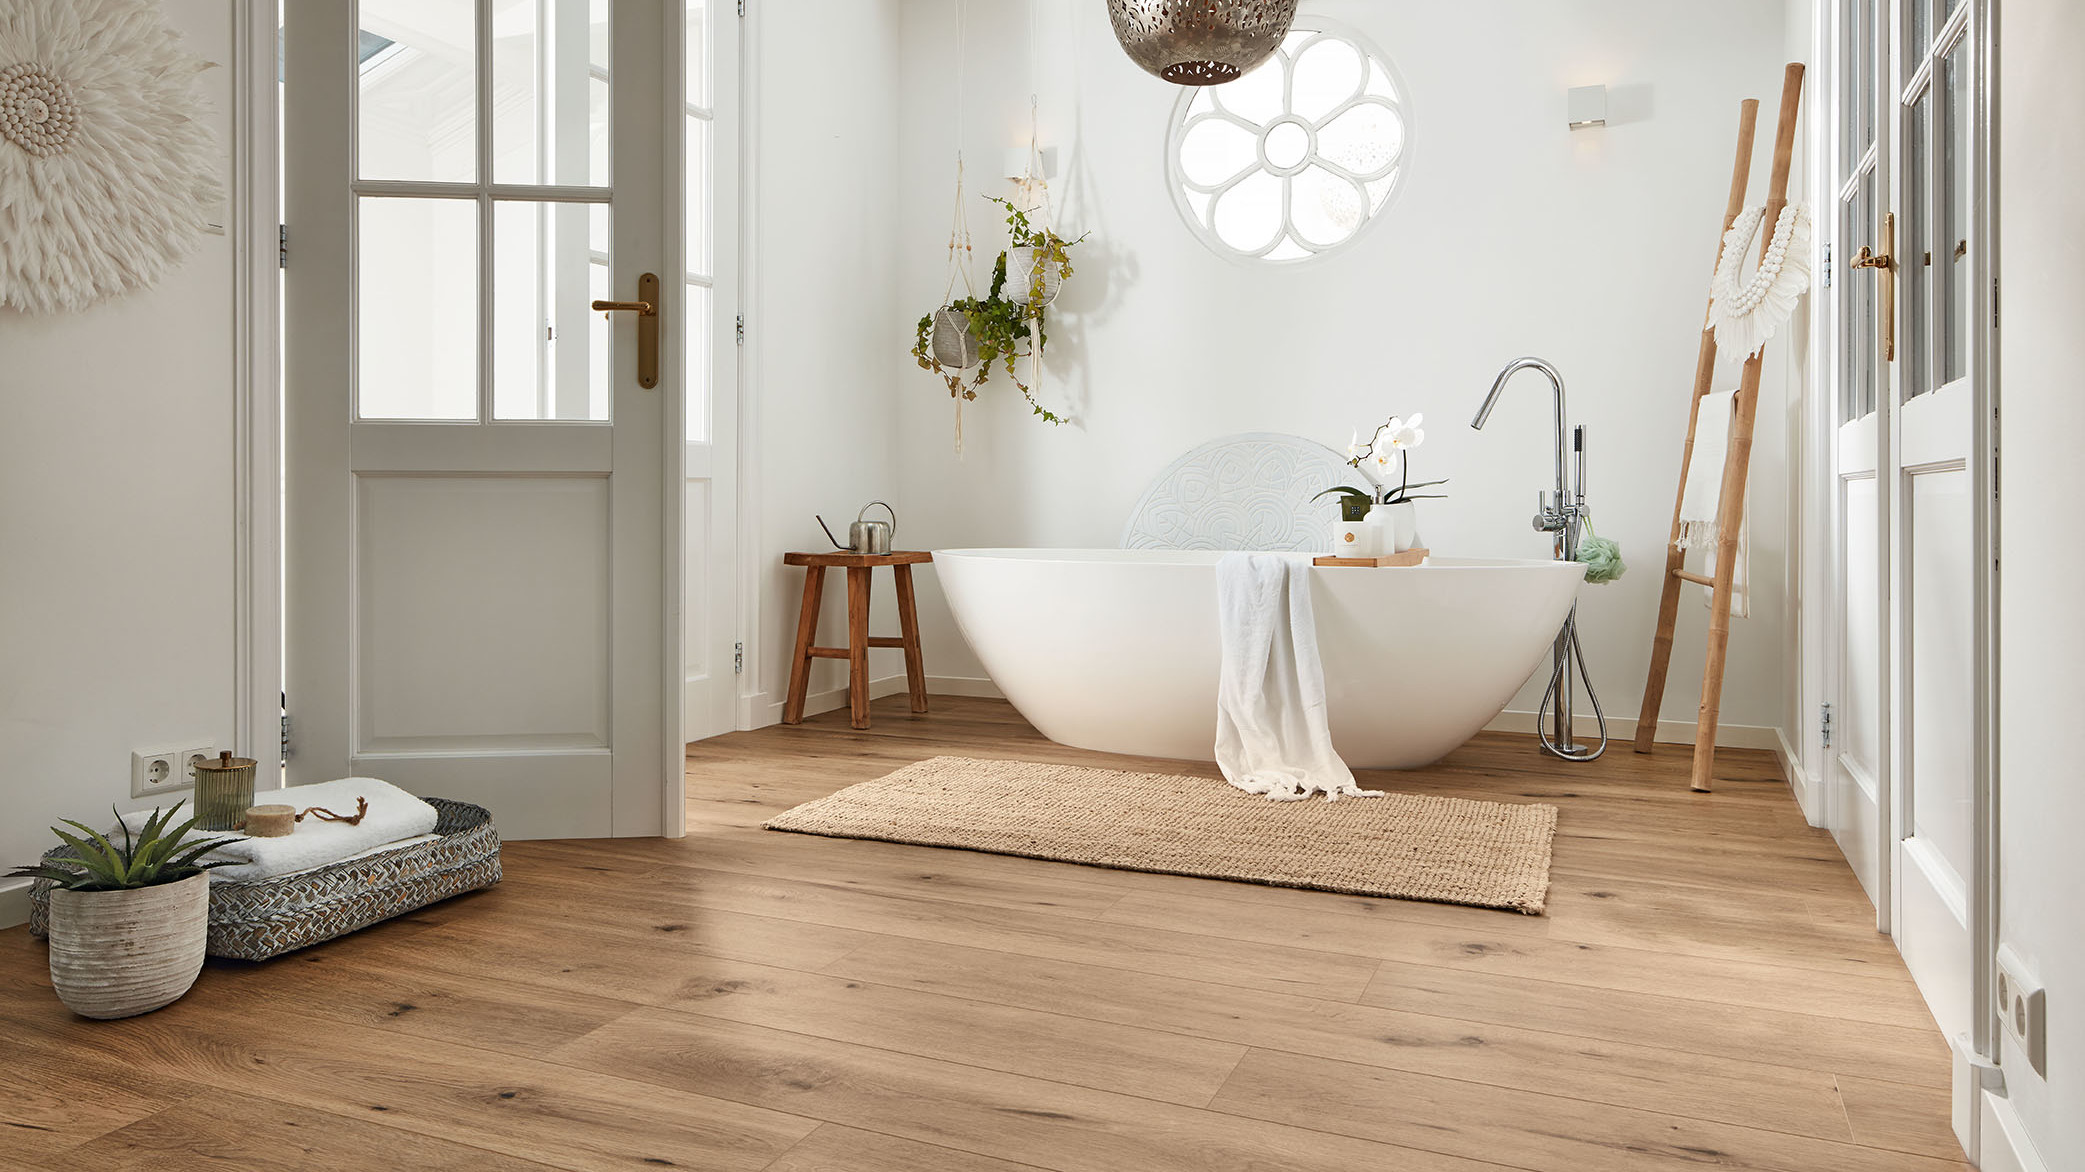 Meister Laminate For Bathrooms, How To Protect Laminate Flooring In Bathroom